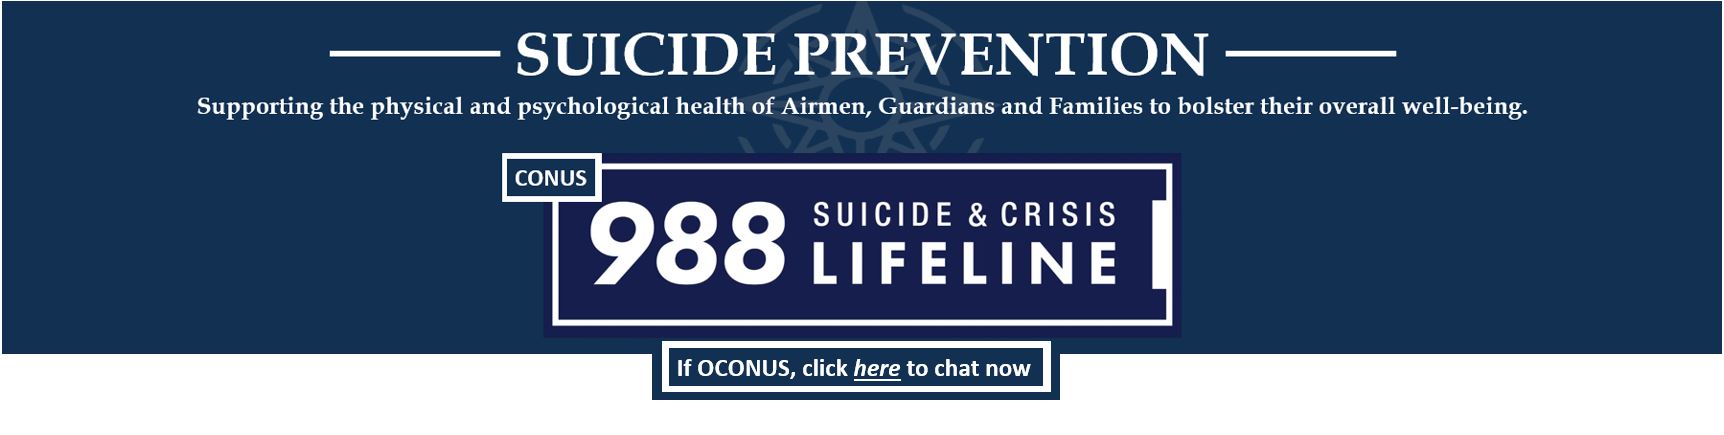 Suicide Prevention page header.  In CONUS, dial 988 if you need immediate crisis assistance.